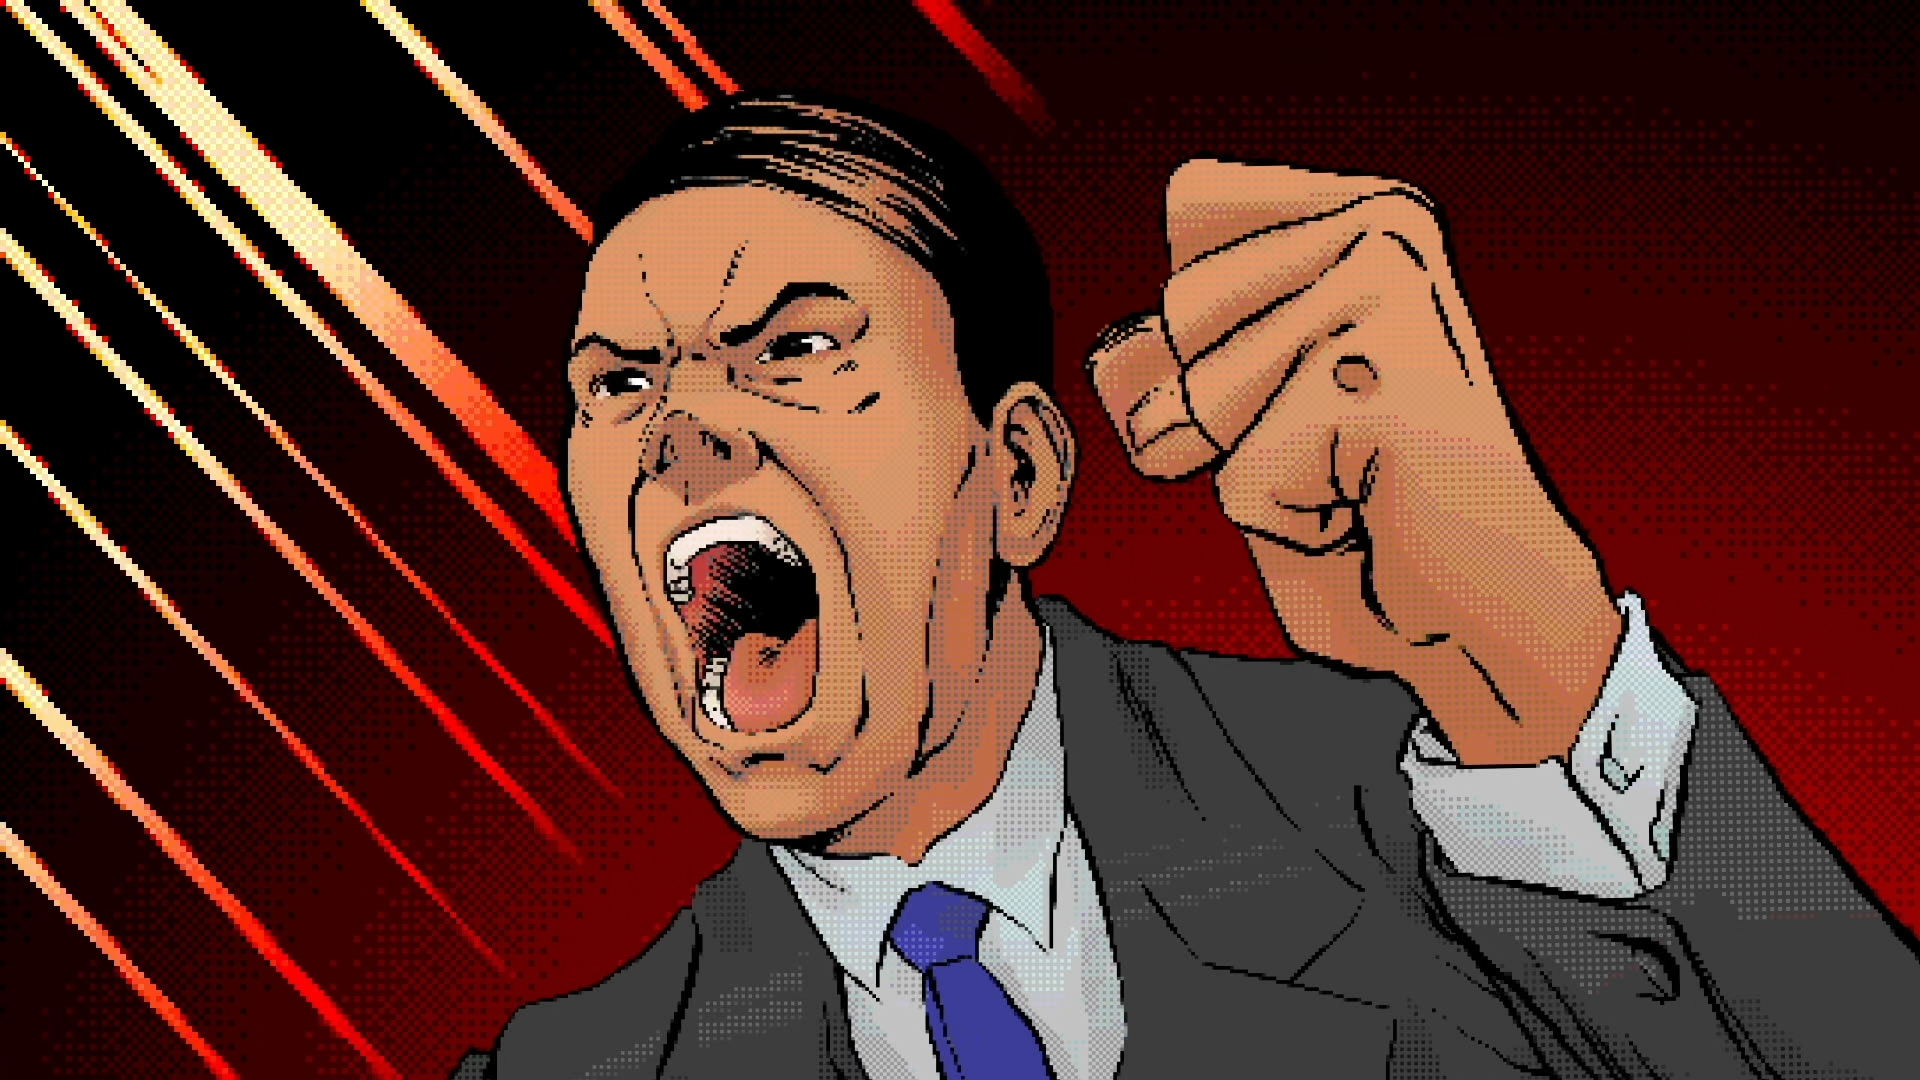 cartoon image of a Japanese executive raising his fist and yelling